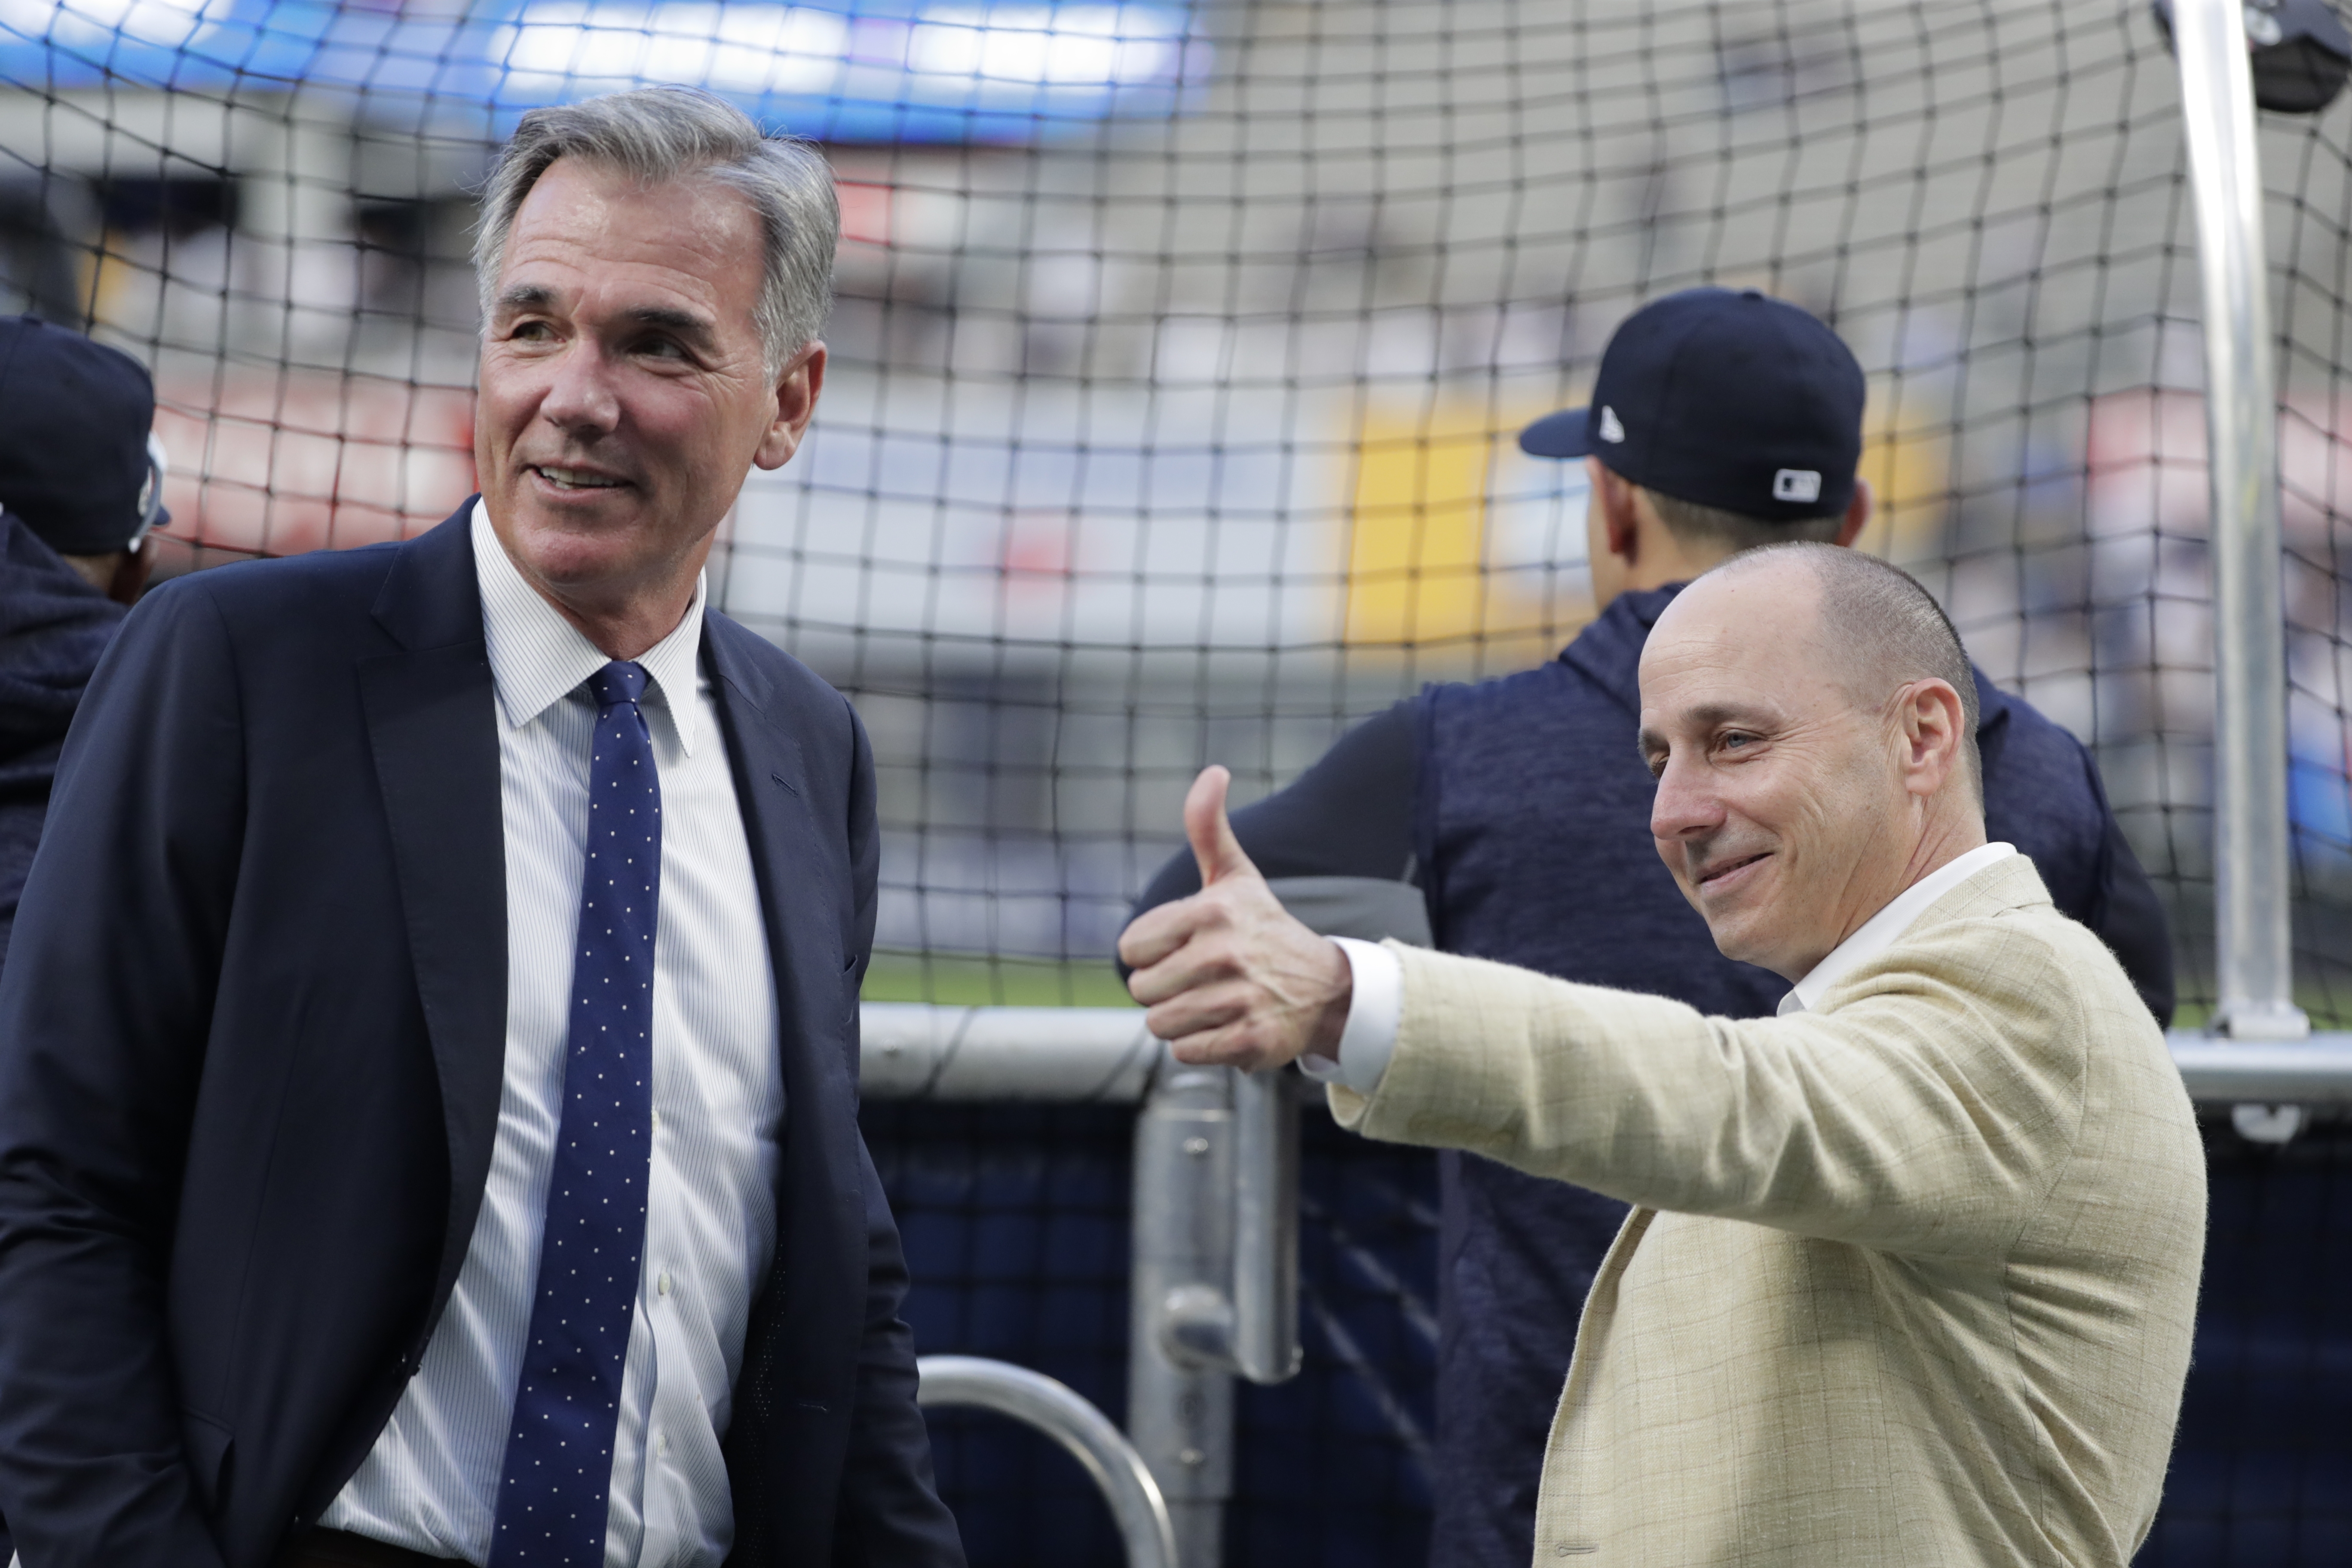 Could A's changing times signal end to Billy Beane era?